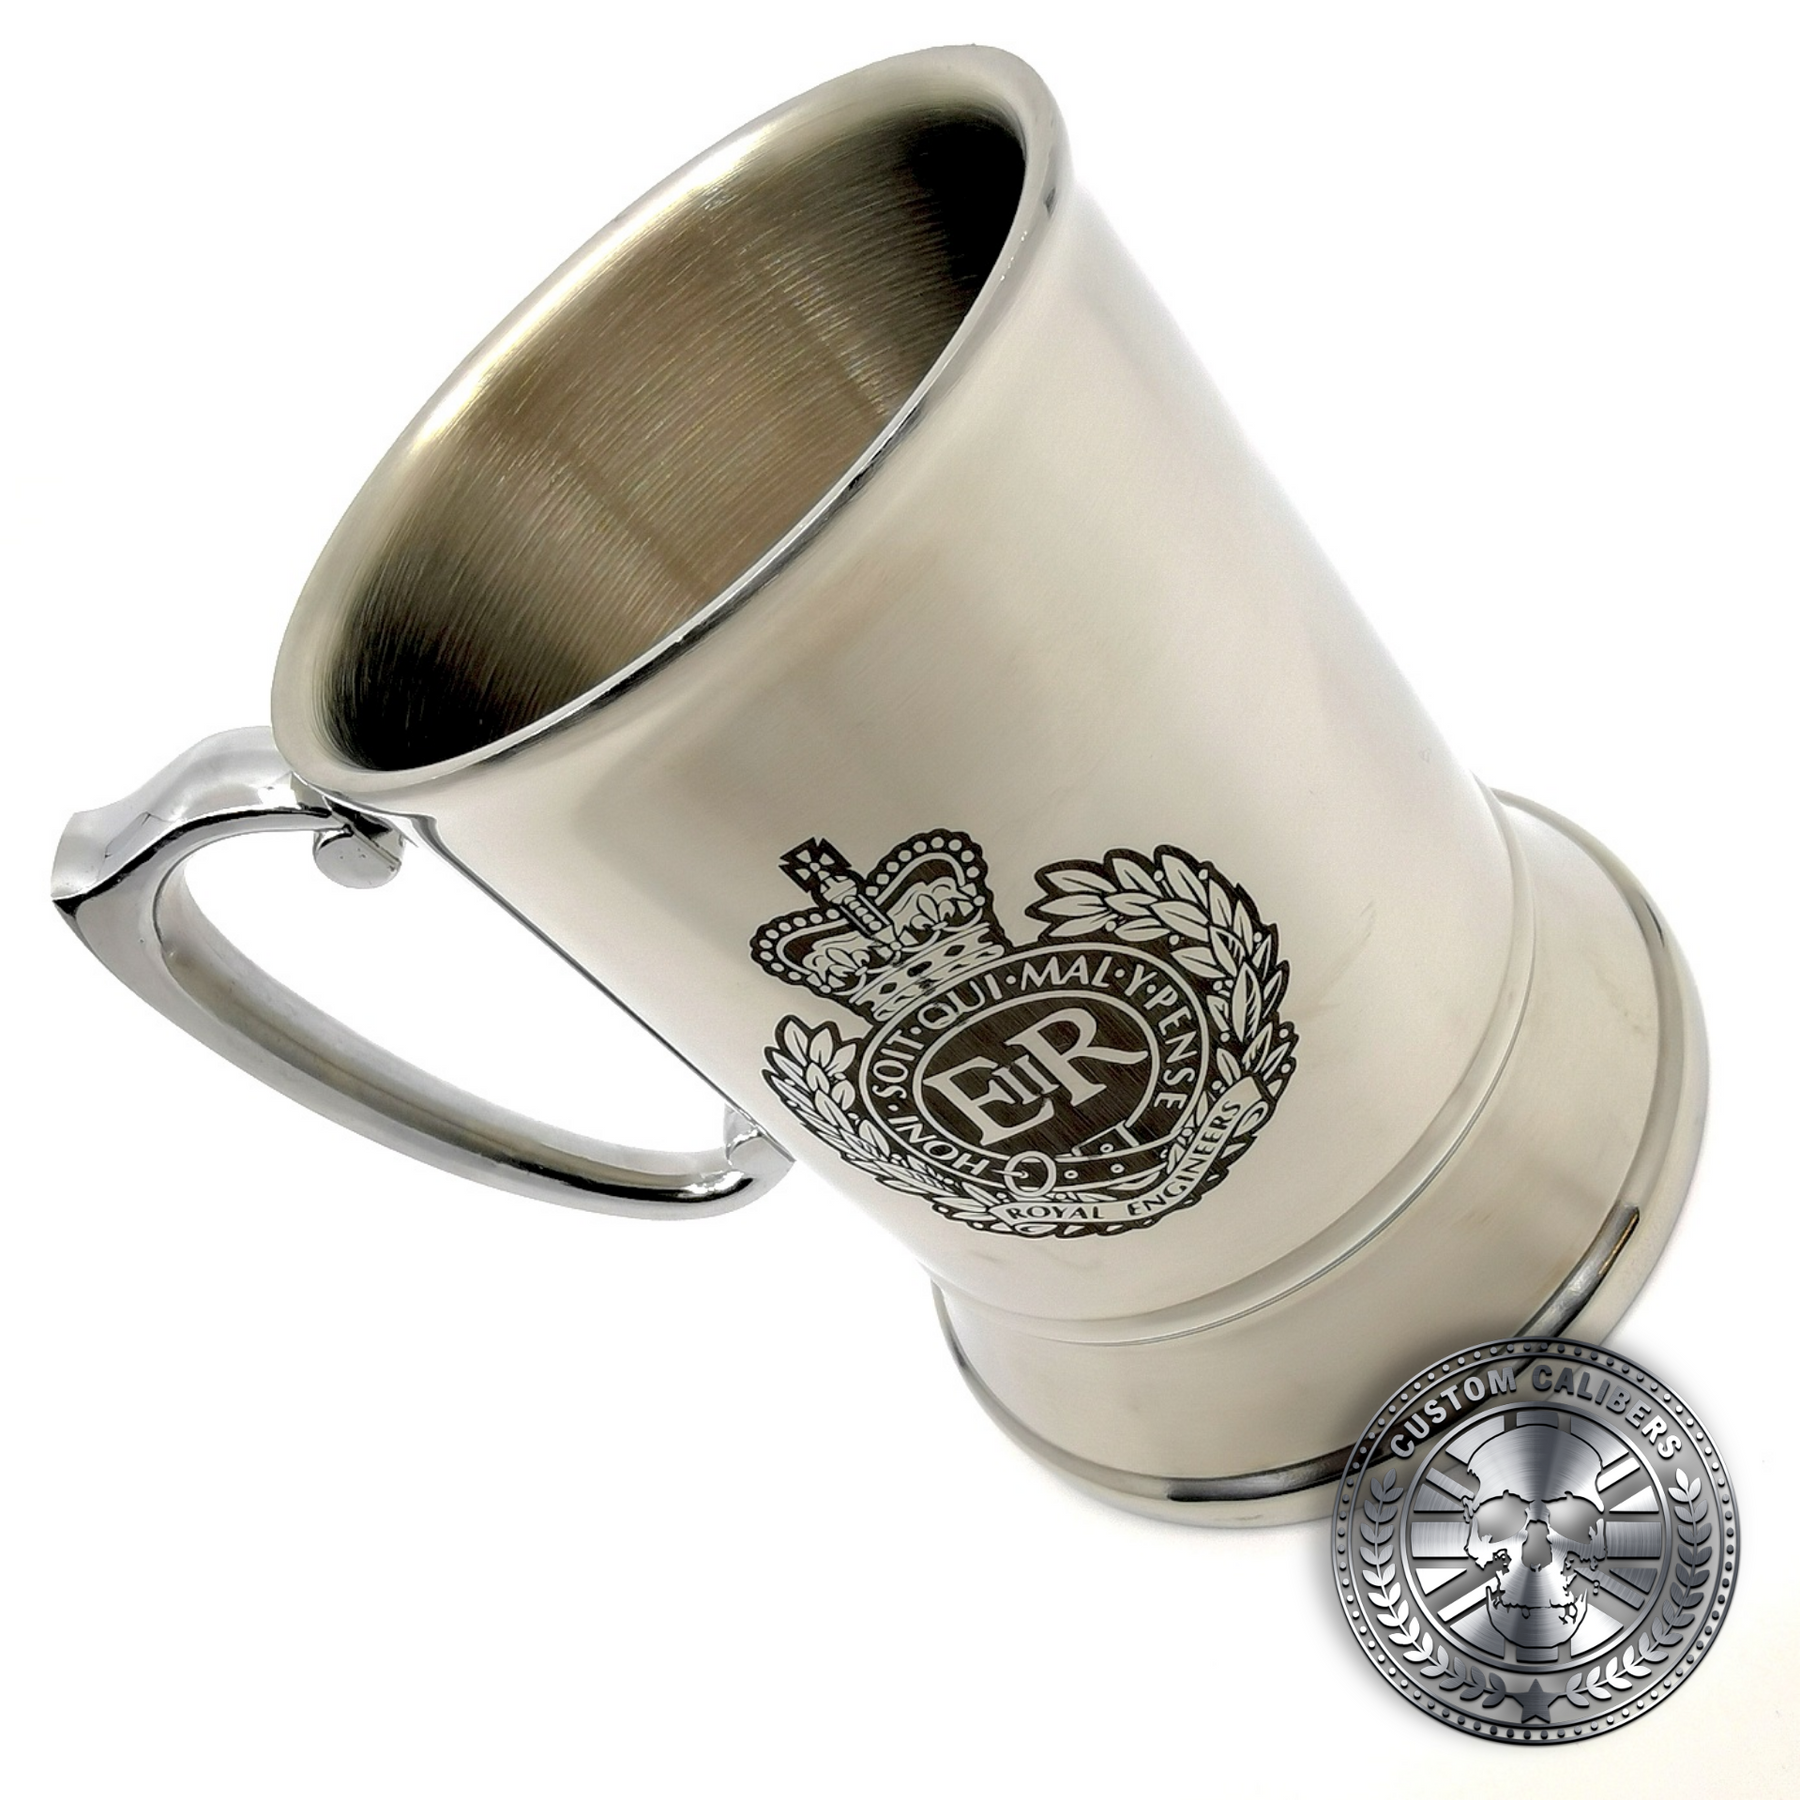 a traditional steel tankard deep etched engraved with royal engineers crest